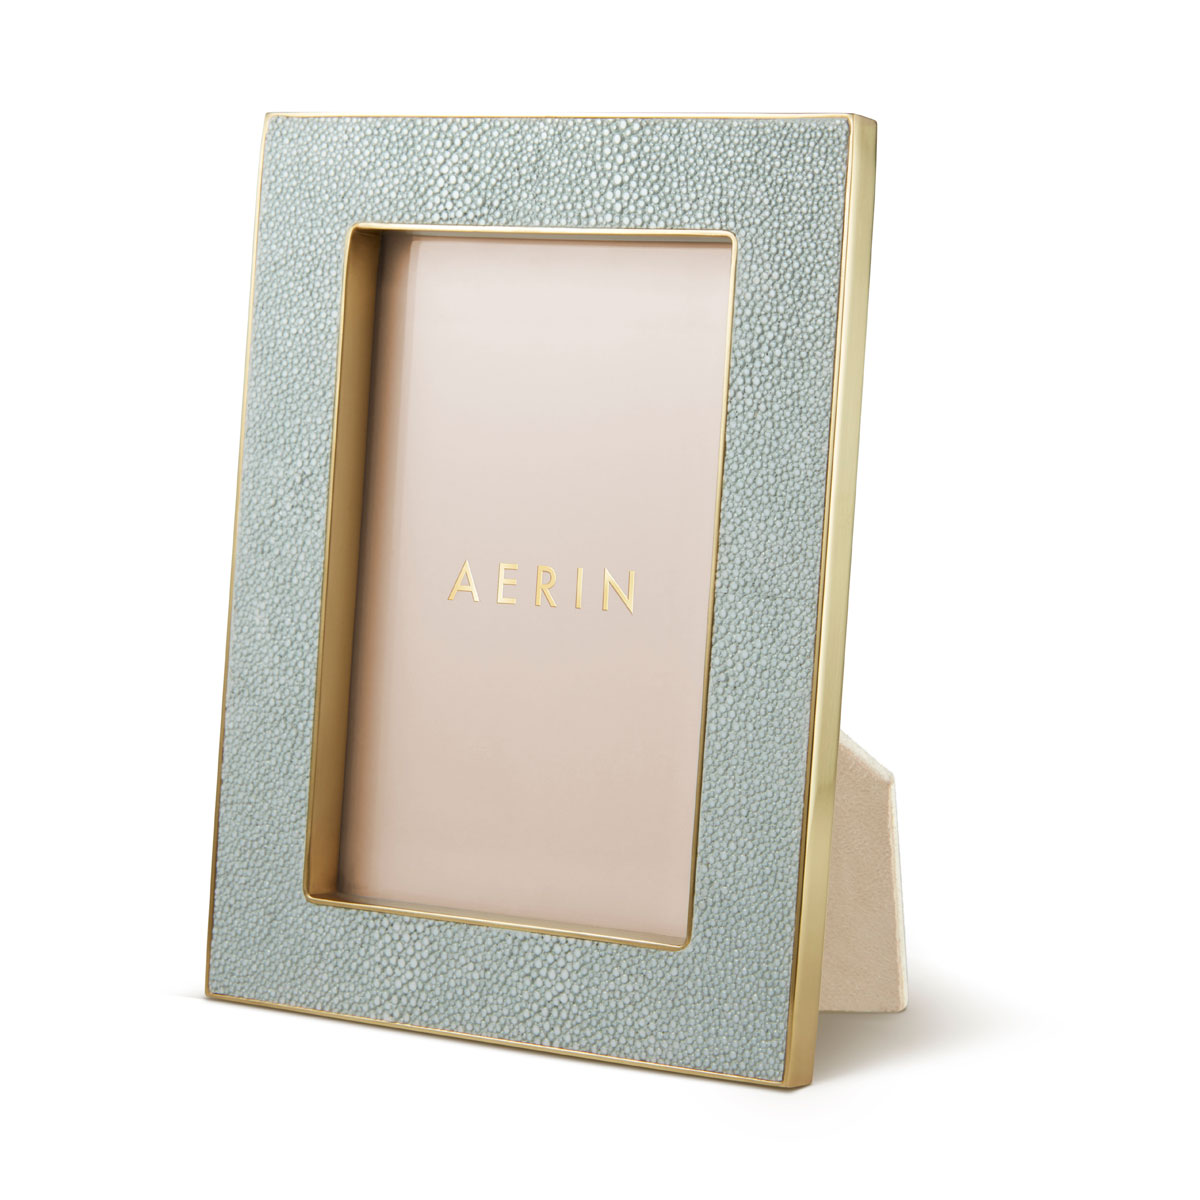 Aerin Classic Shagreen Mist 4x6" Picture Frame